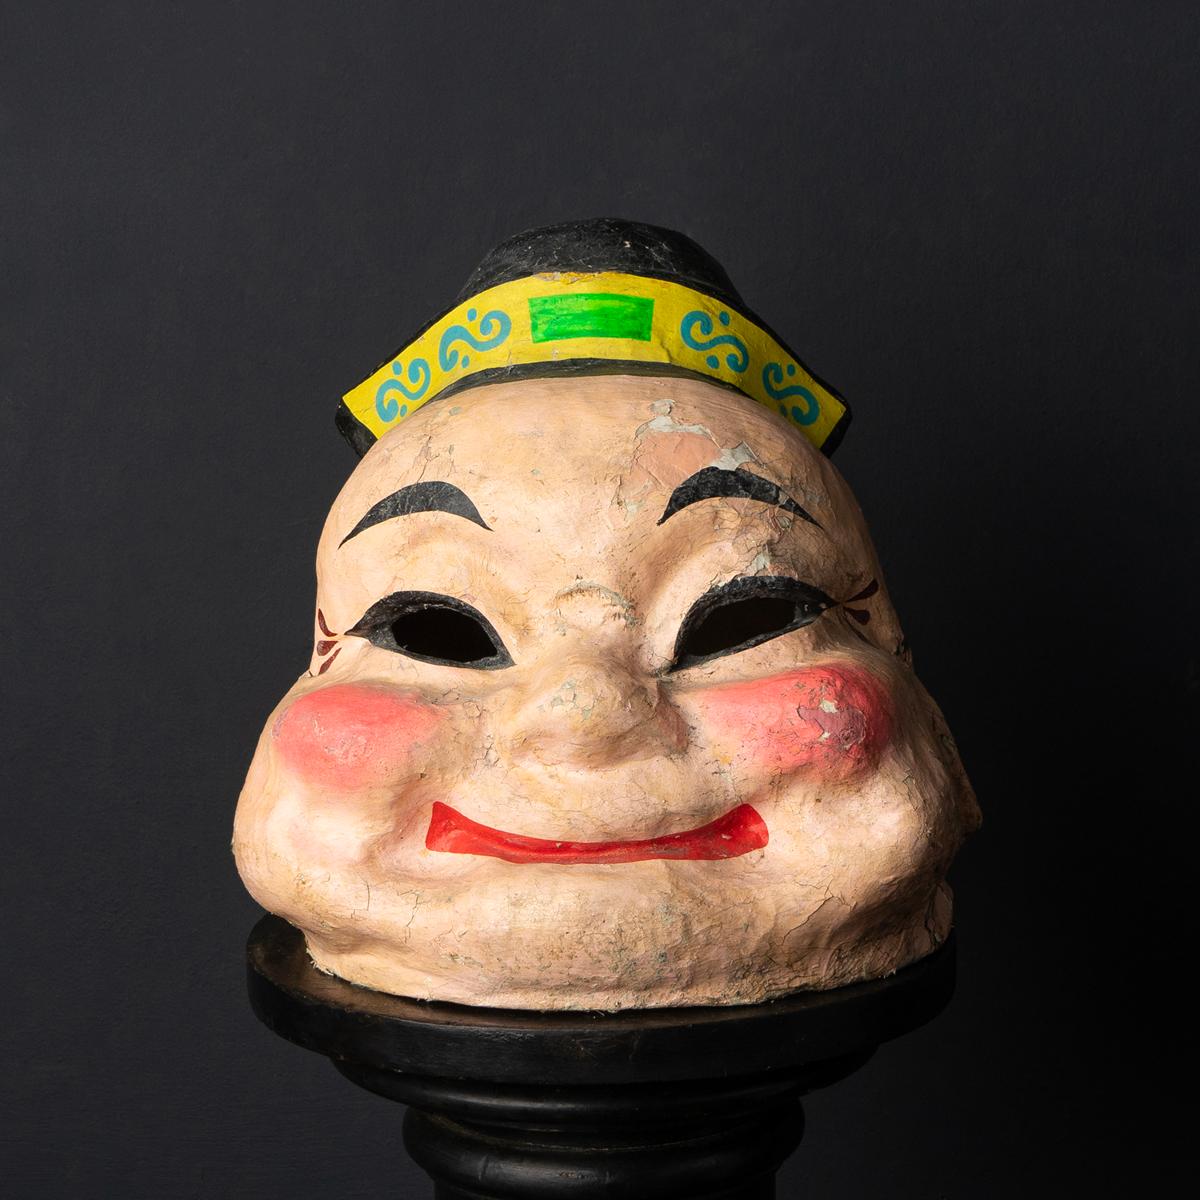 Mid-century theatre/festival mask.
An extremely characterful mask depicting a chubby face with bulbous, rosy cheeks and a big grin.

Made from paper mache with wirework and wood underneath and then hand painted in vibrant colours.

Originally